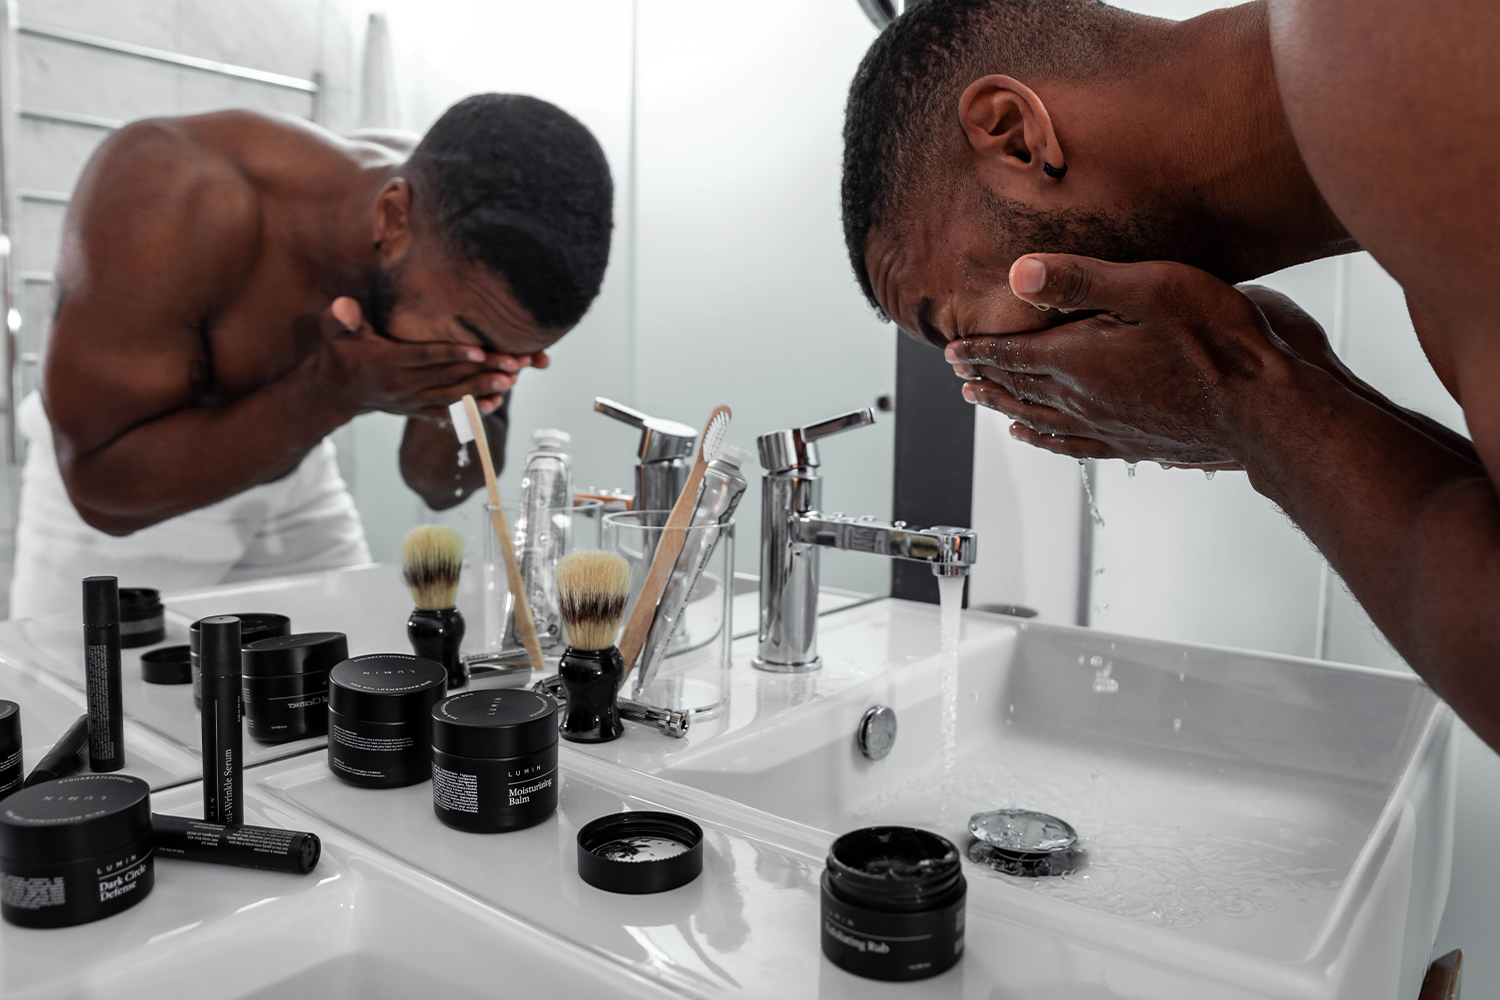 Consumer Spotlight: Cosmetics, Men's Grooming and a Shift to